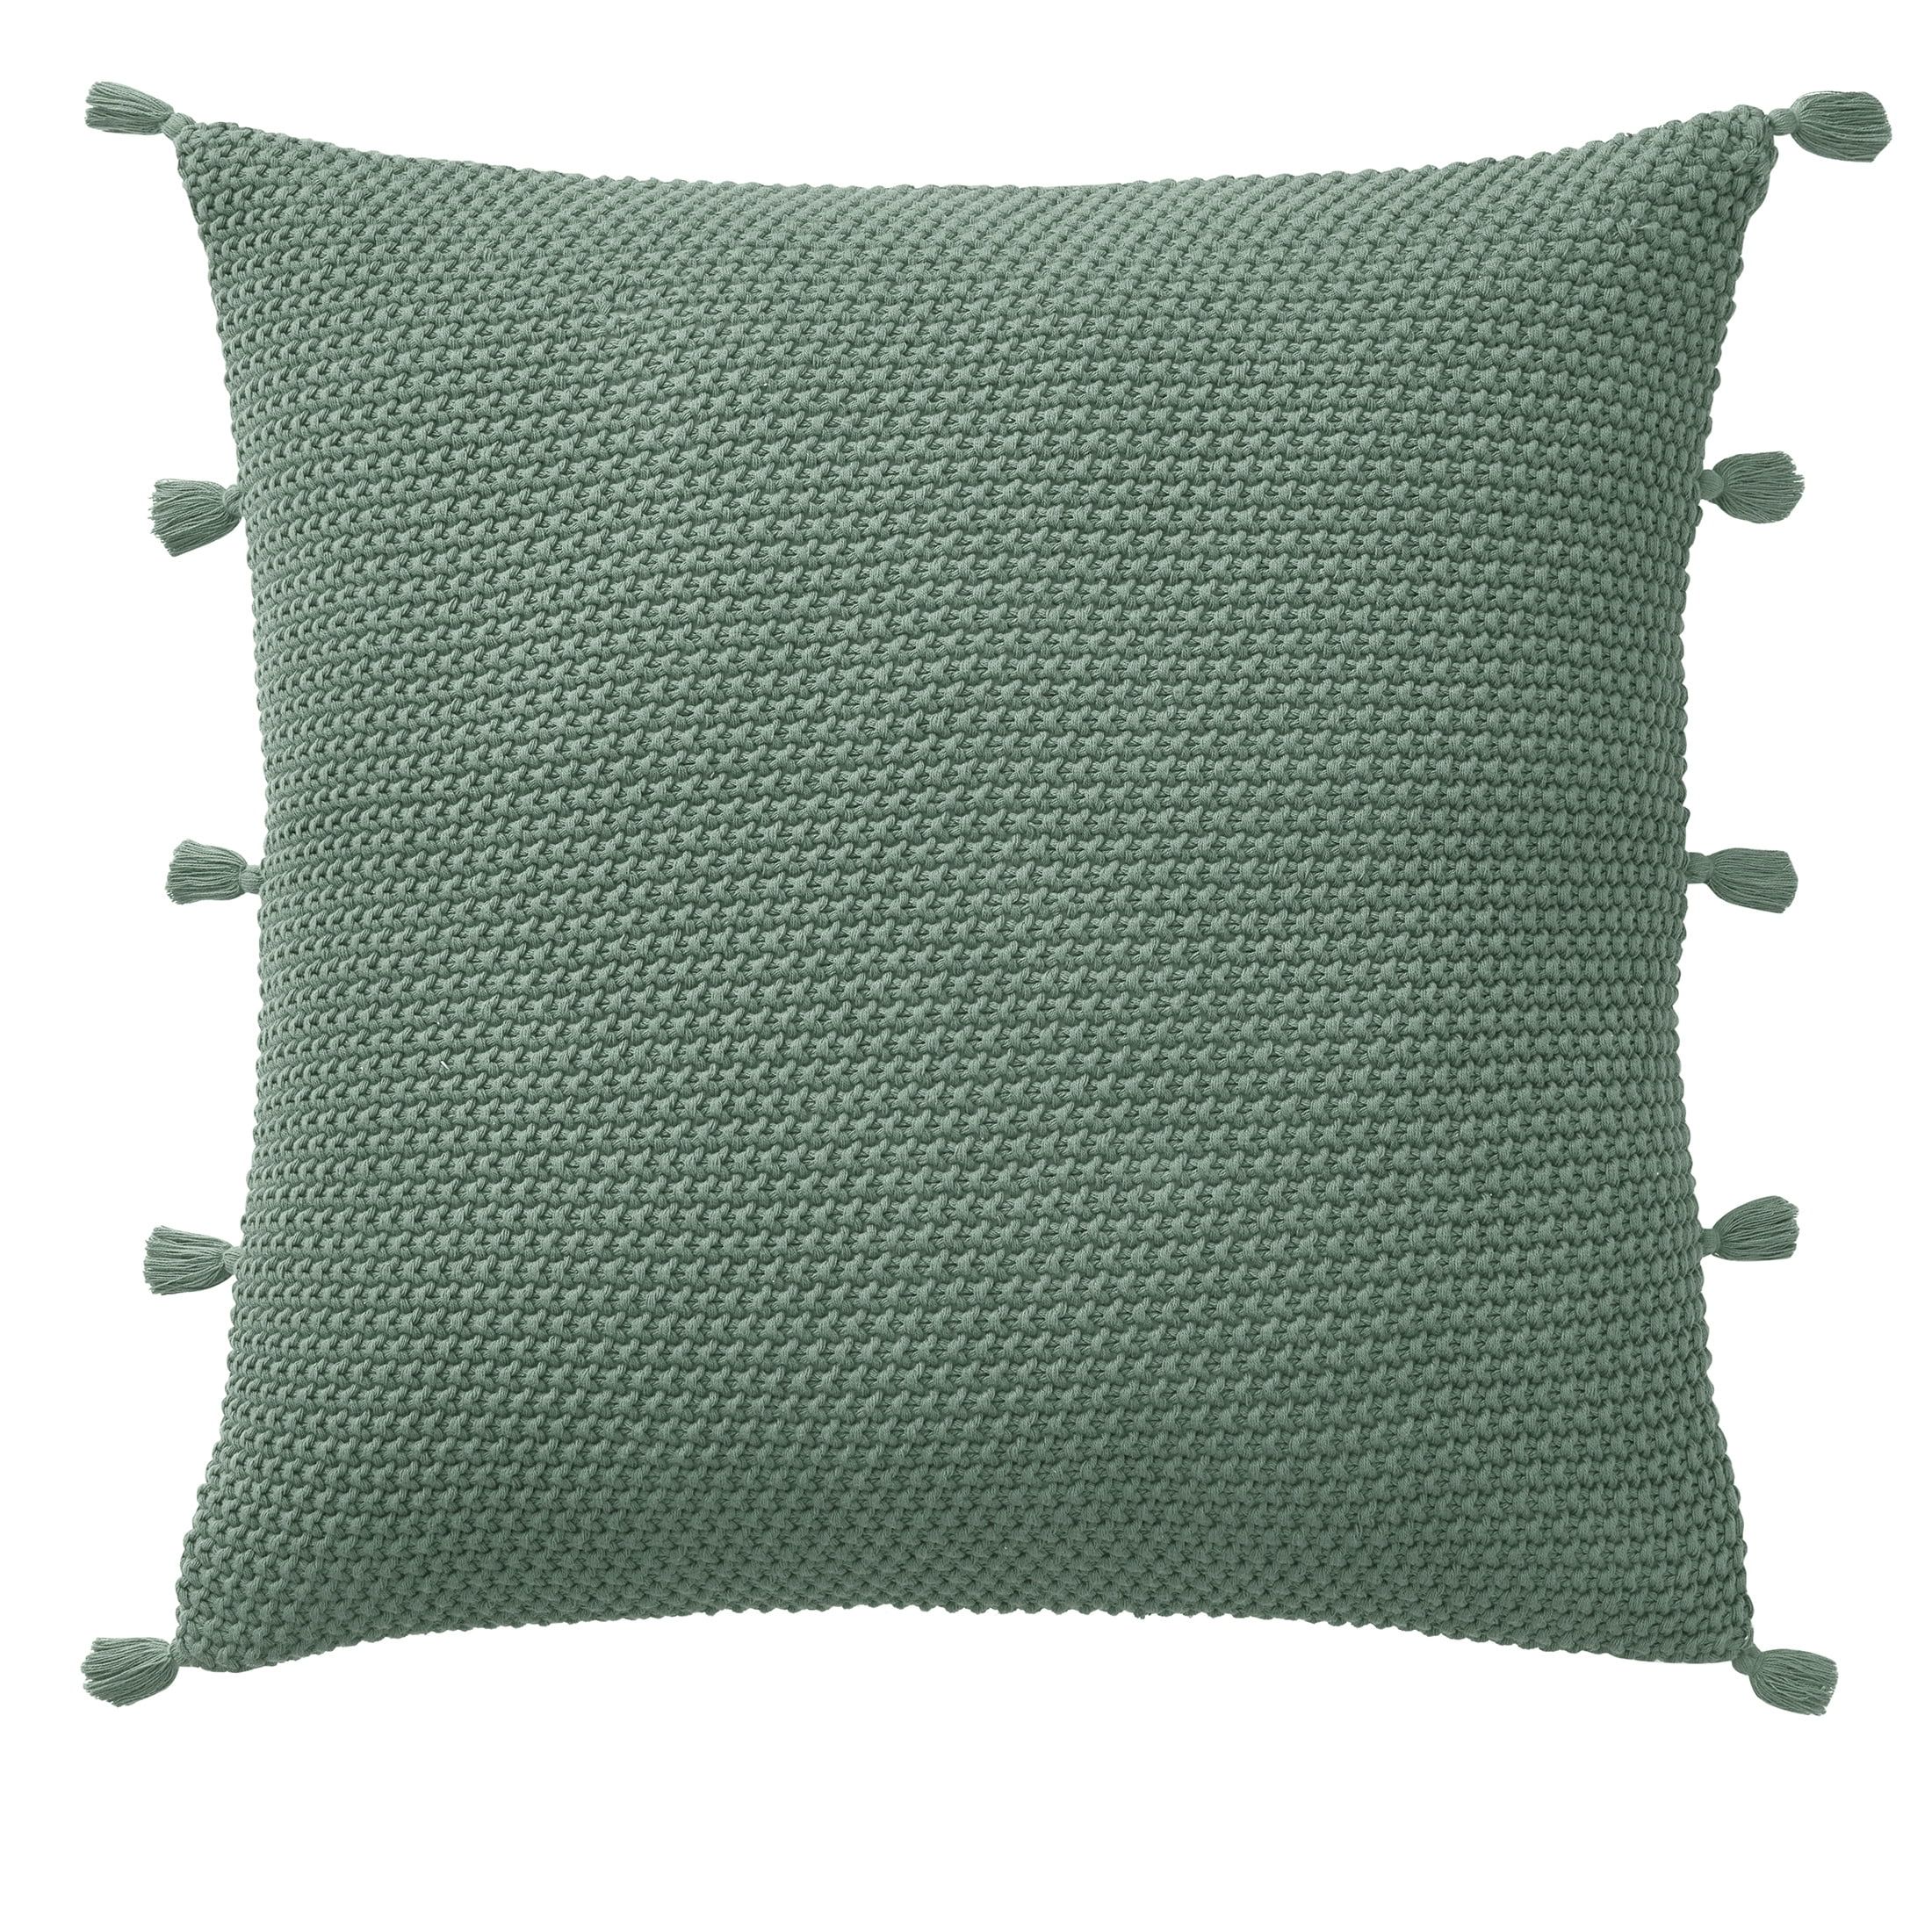 My Texas House Sophia Sweater Knit Decorative Pillow Cover, 20" x 20", Green | Walmart (US)